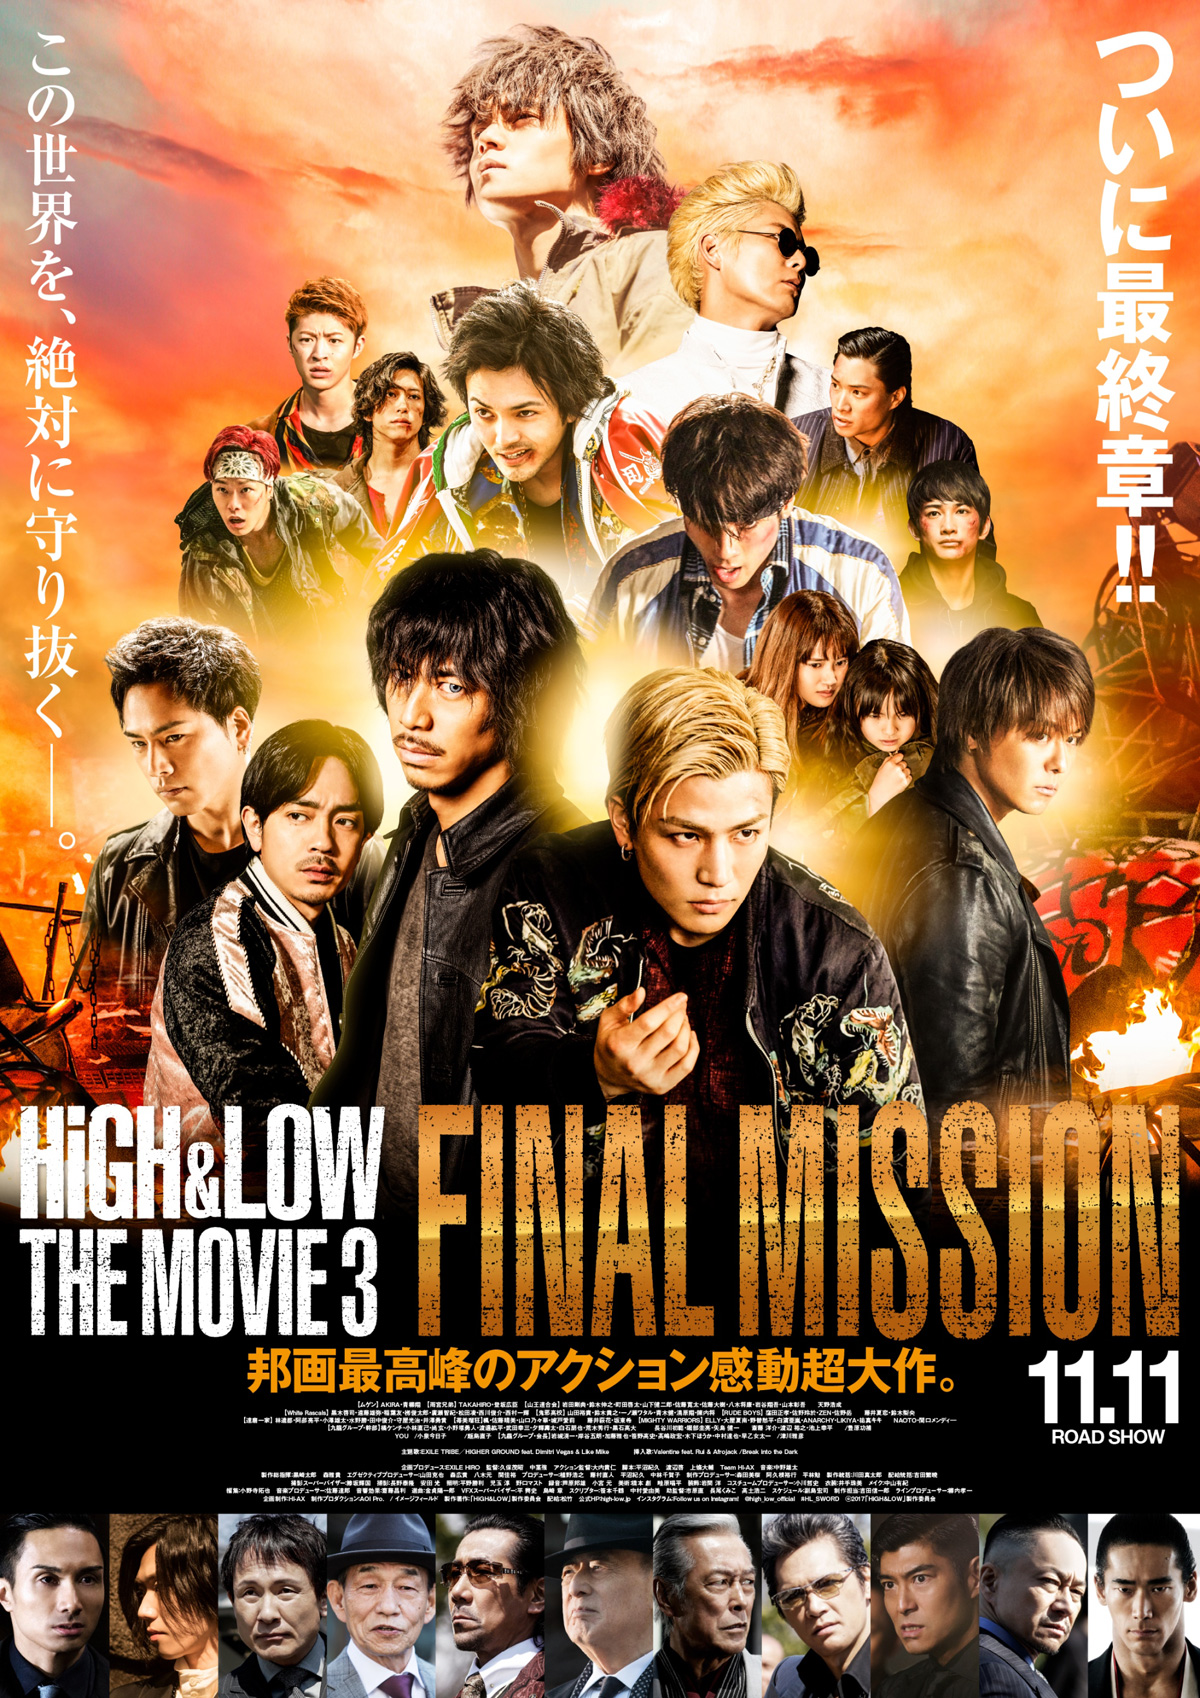 HiGH&LOW THE MOVIE 3 / FINAL MISSIONの画像